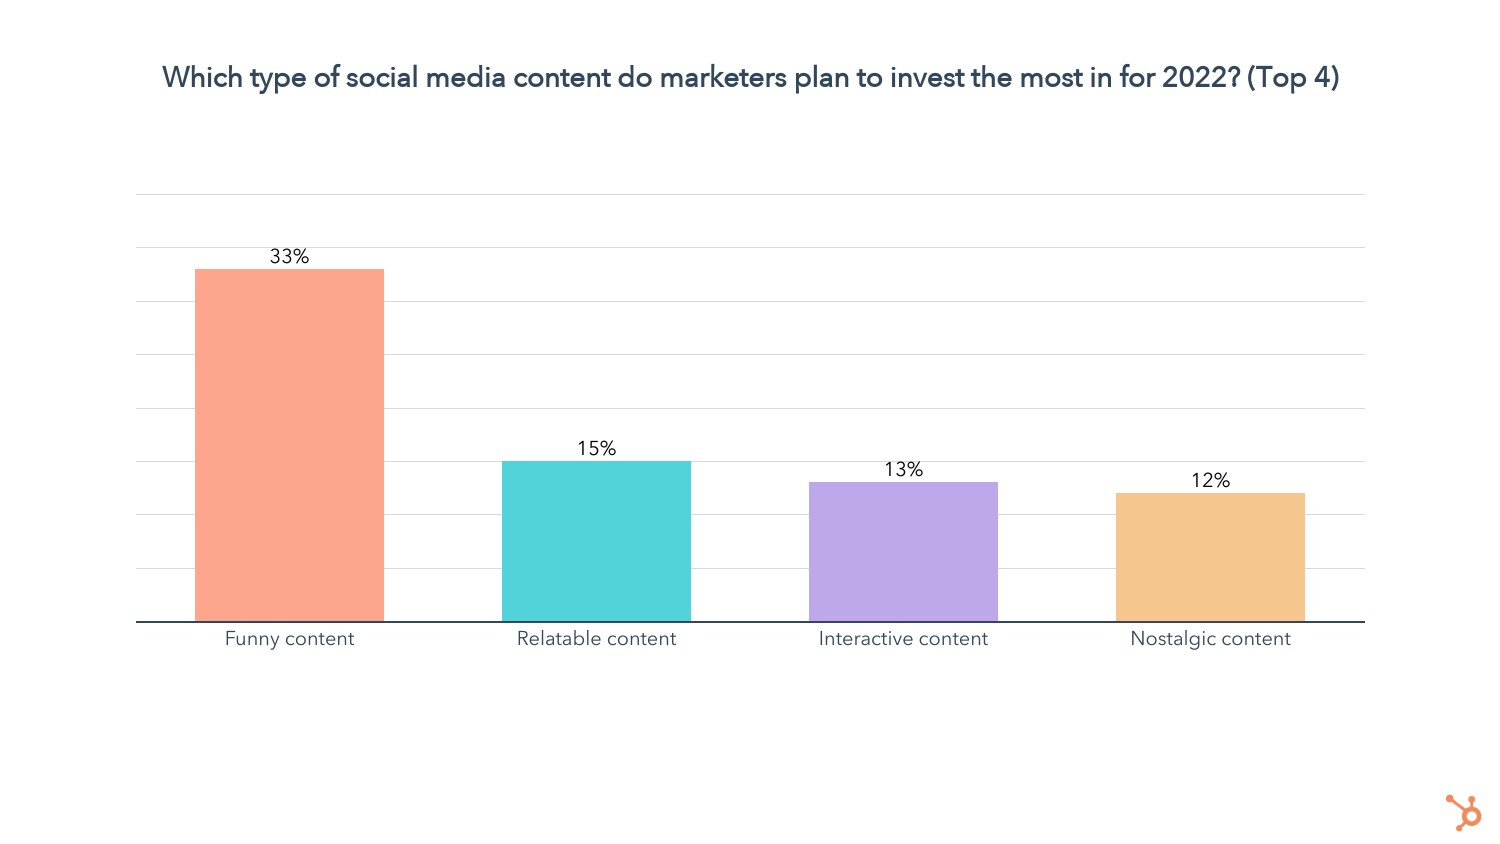 which social media content types will get the biggest investment